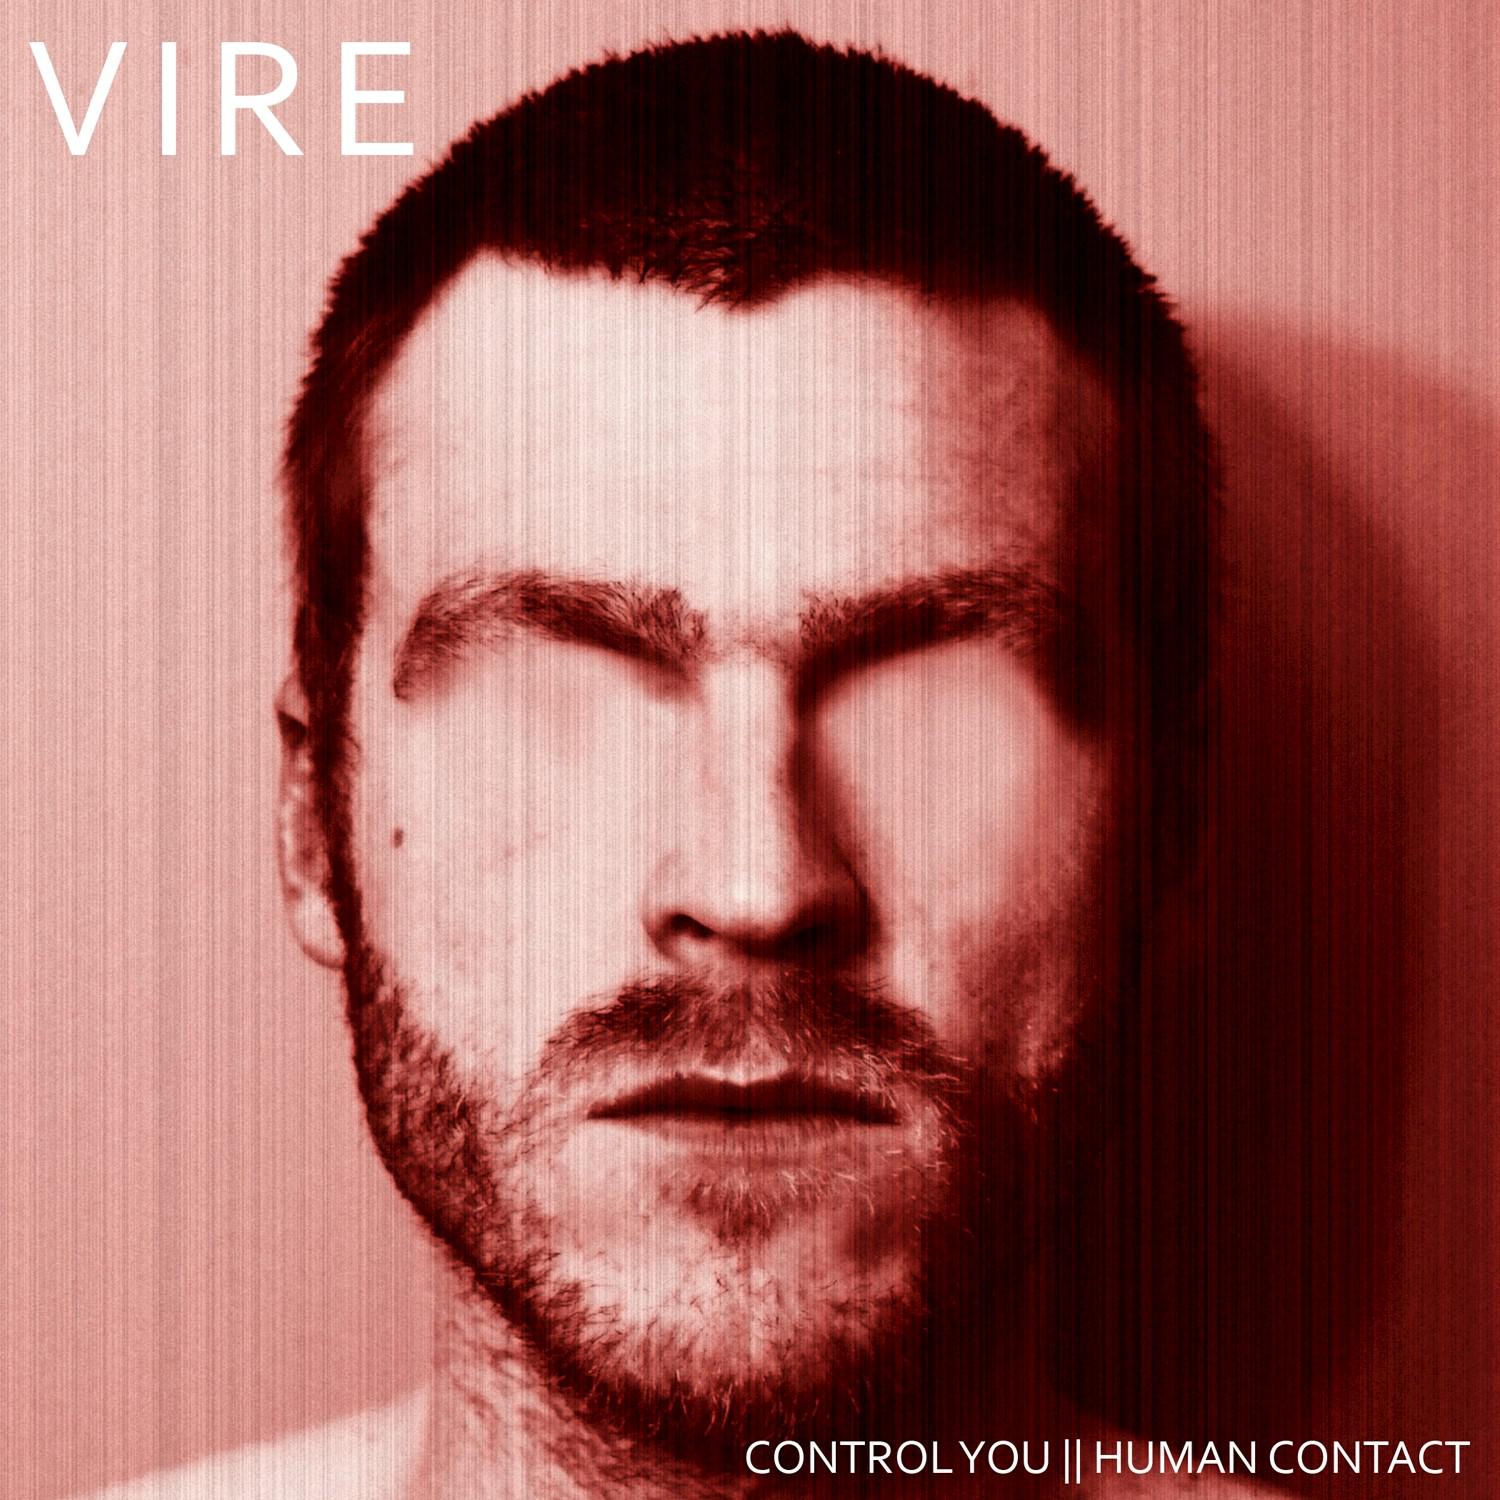 VIRE - Control You